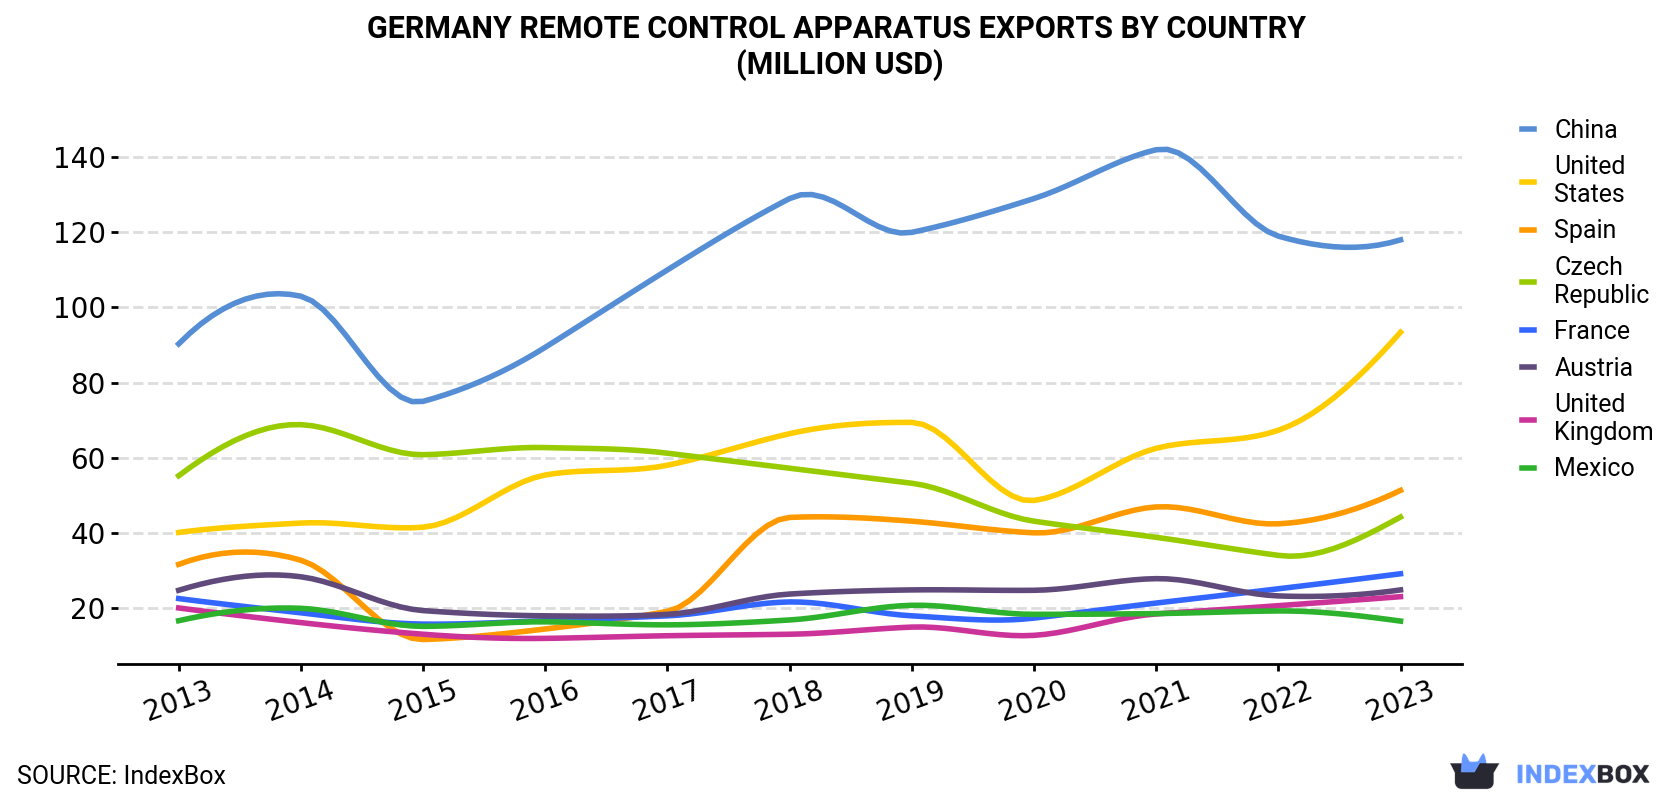 Germany Remote Control Apparatus Exports By Country (Million USD)